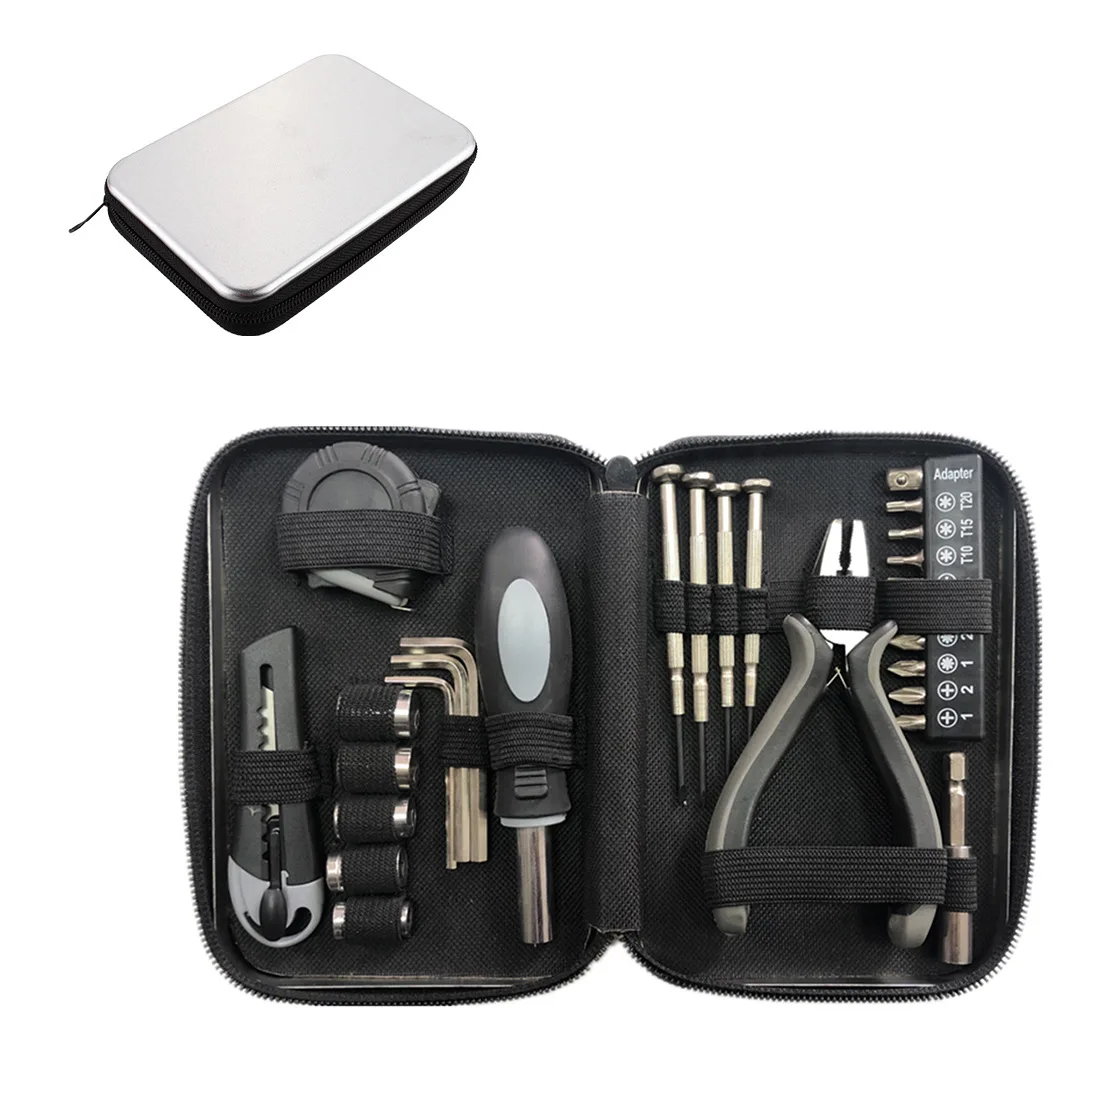 Iron Box Hardware Tool Set 27pcs Multifunctional Screwdriver Wrench Tape Measure Combination Hand Tool Promotional Gifts